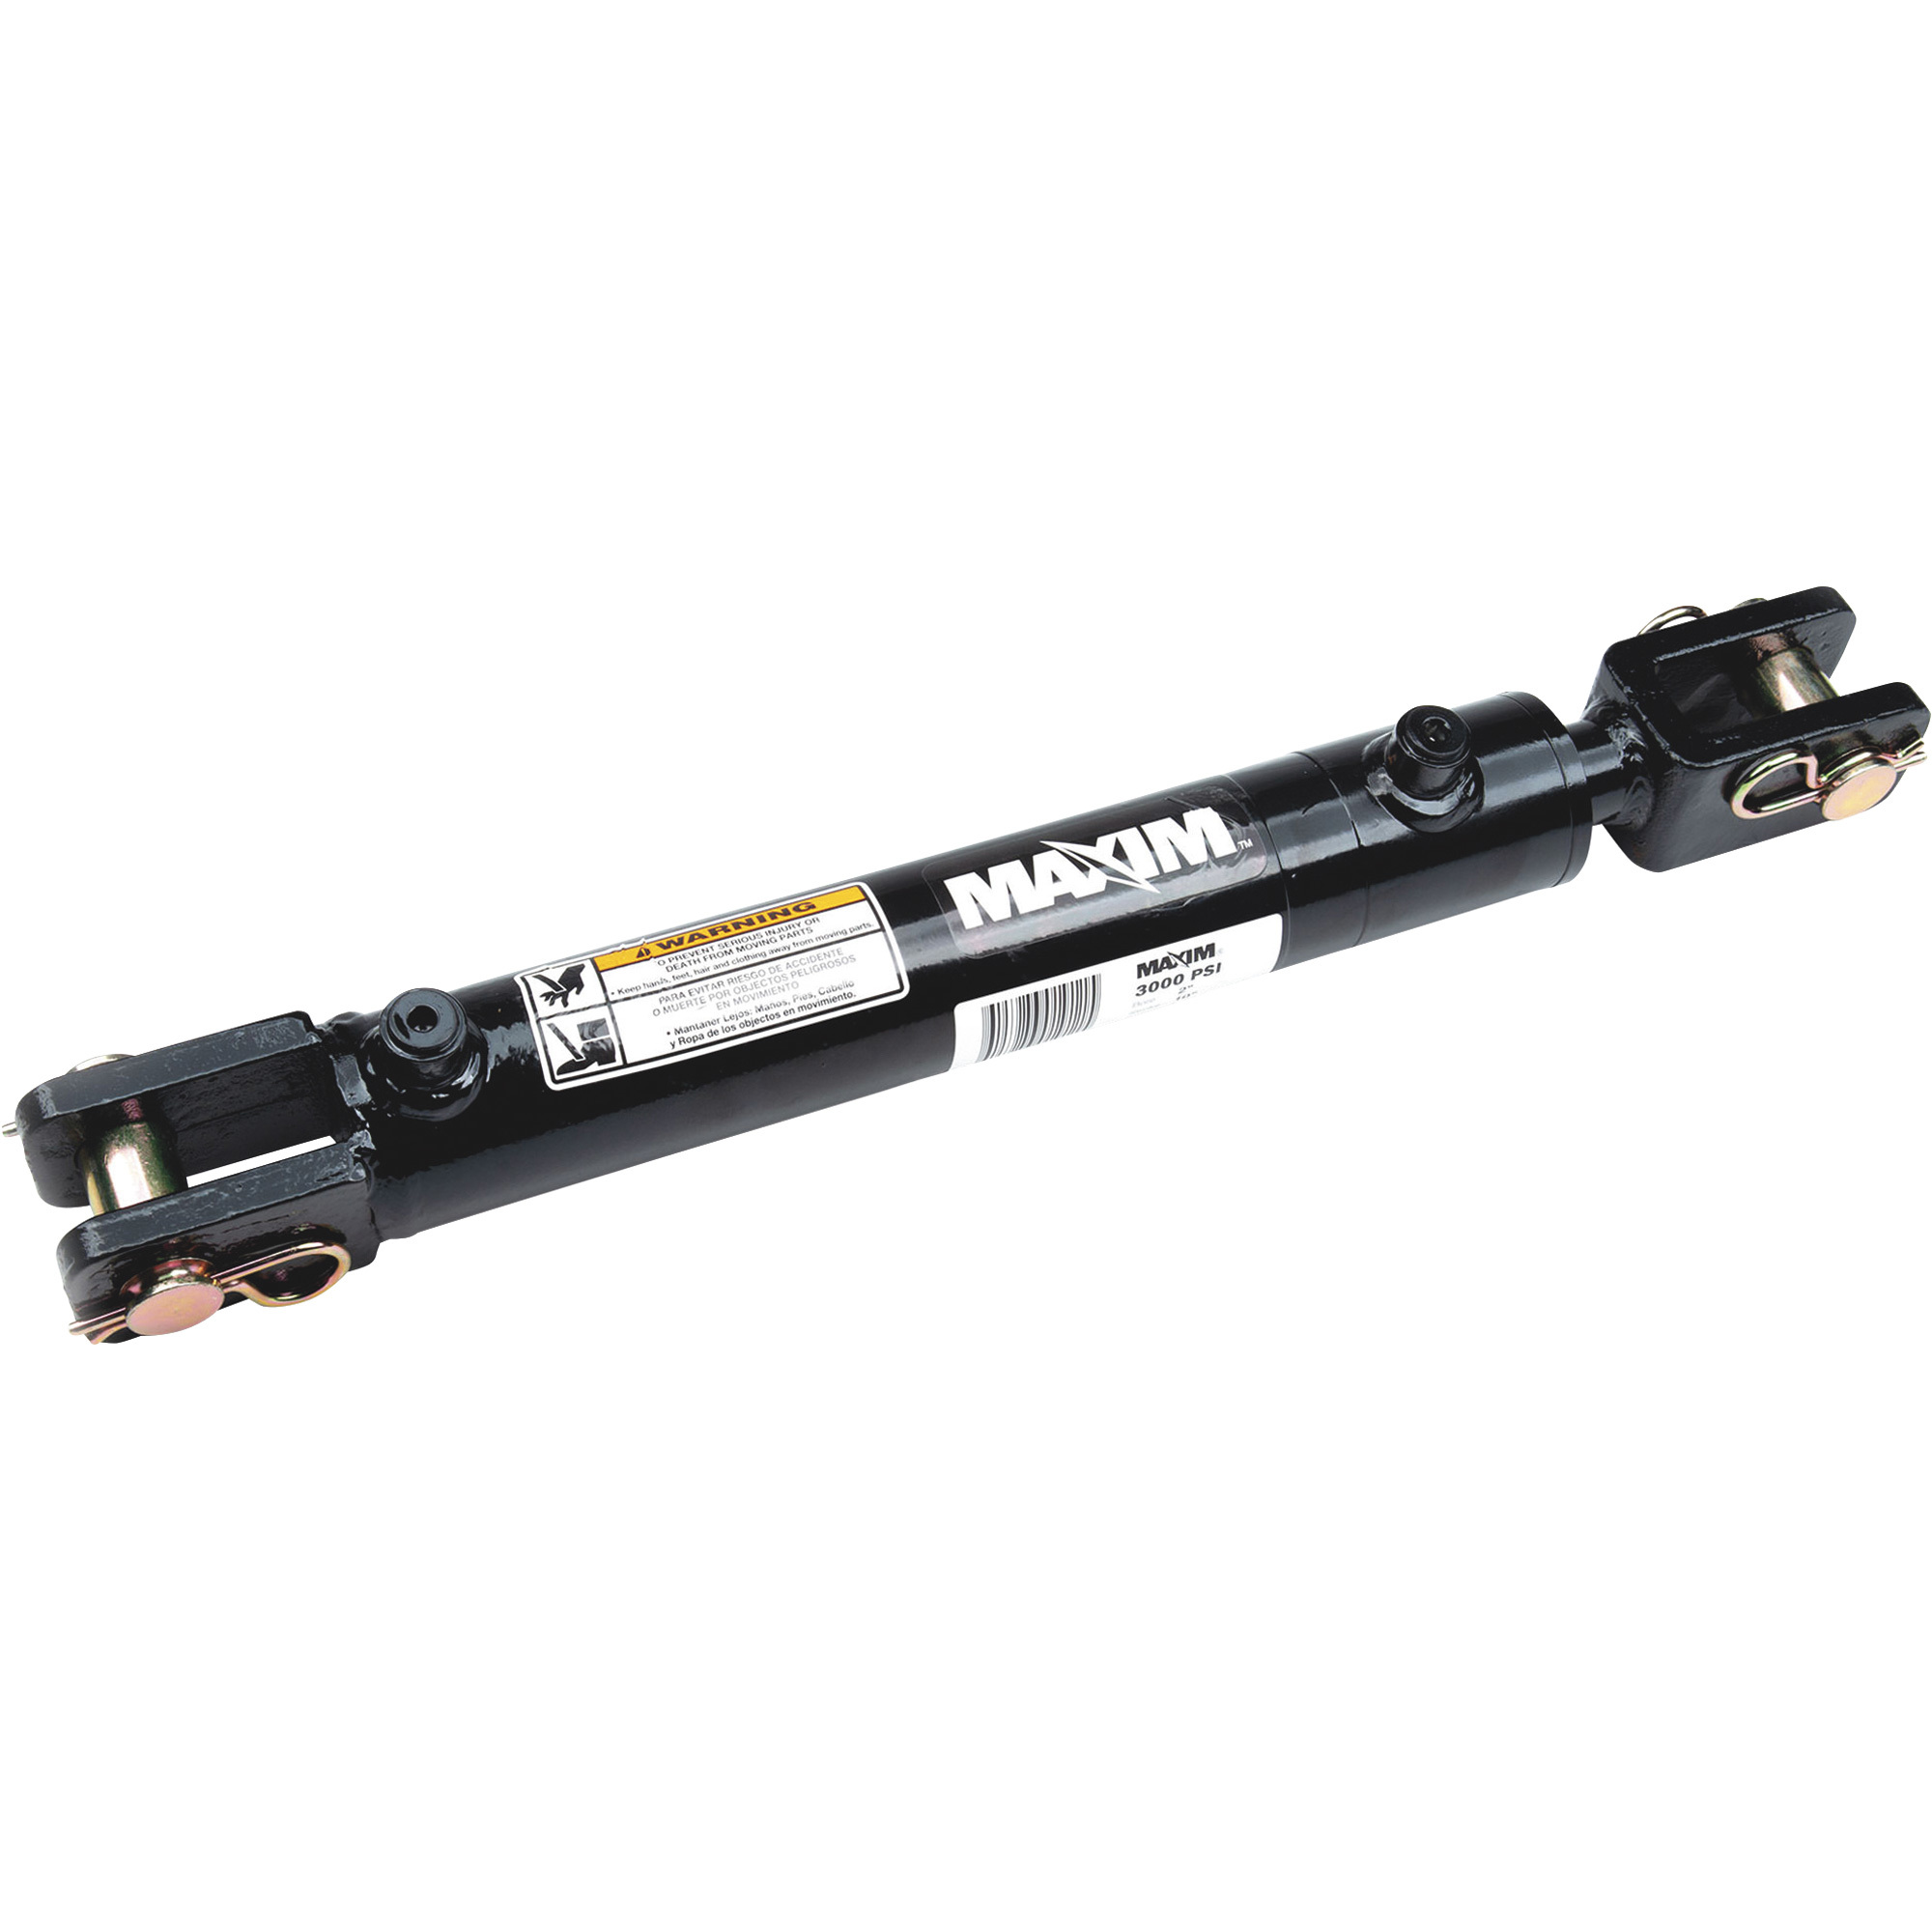 Maxim, WC Welded Cylinder, Max. PSI 3000, Bore Diameter 3 in, Stroke Length 20 in, Model 288435